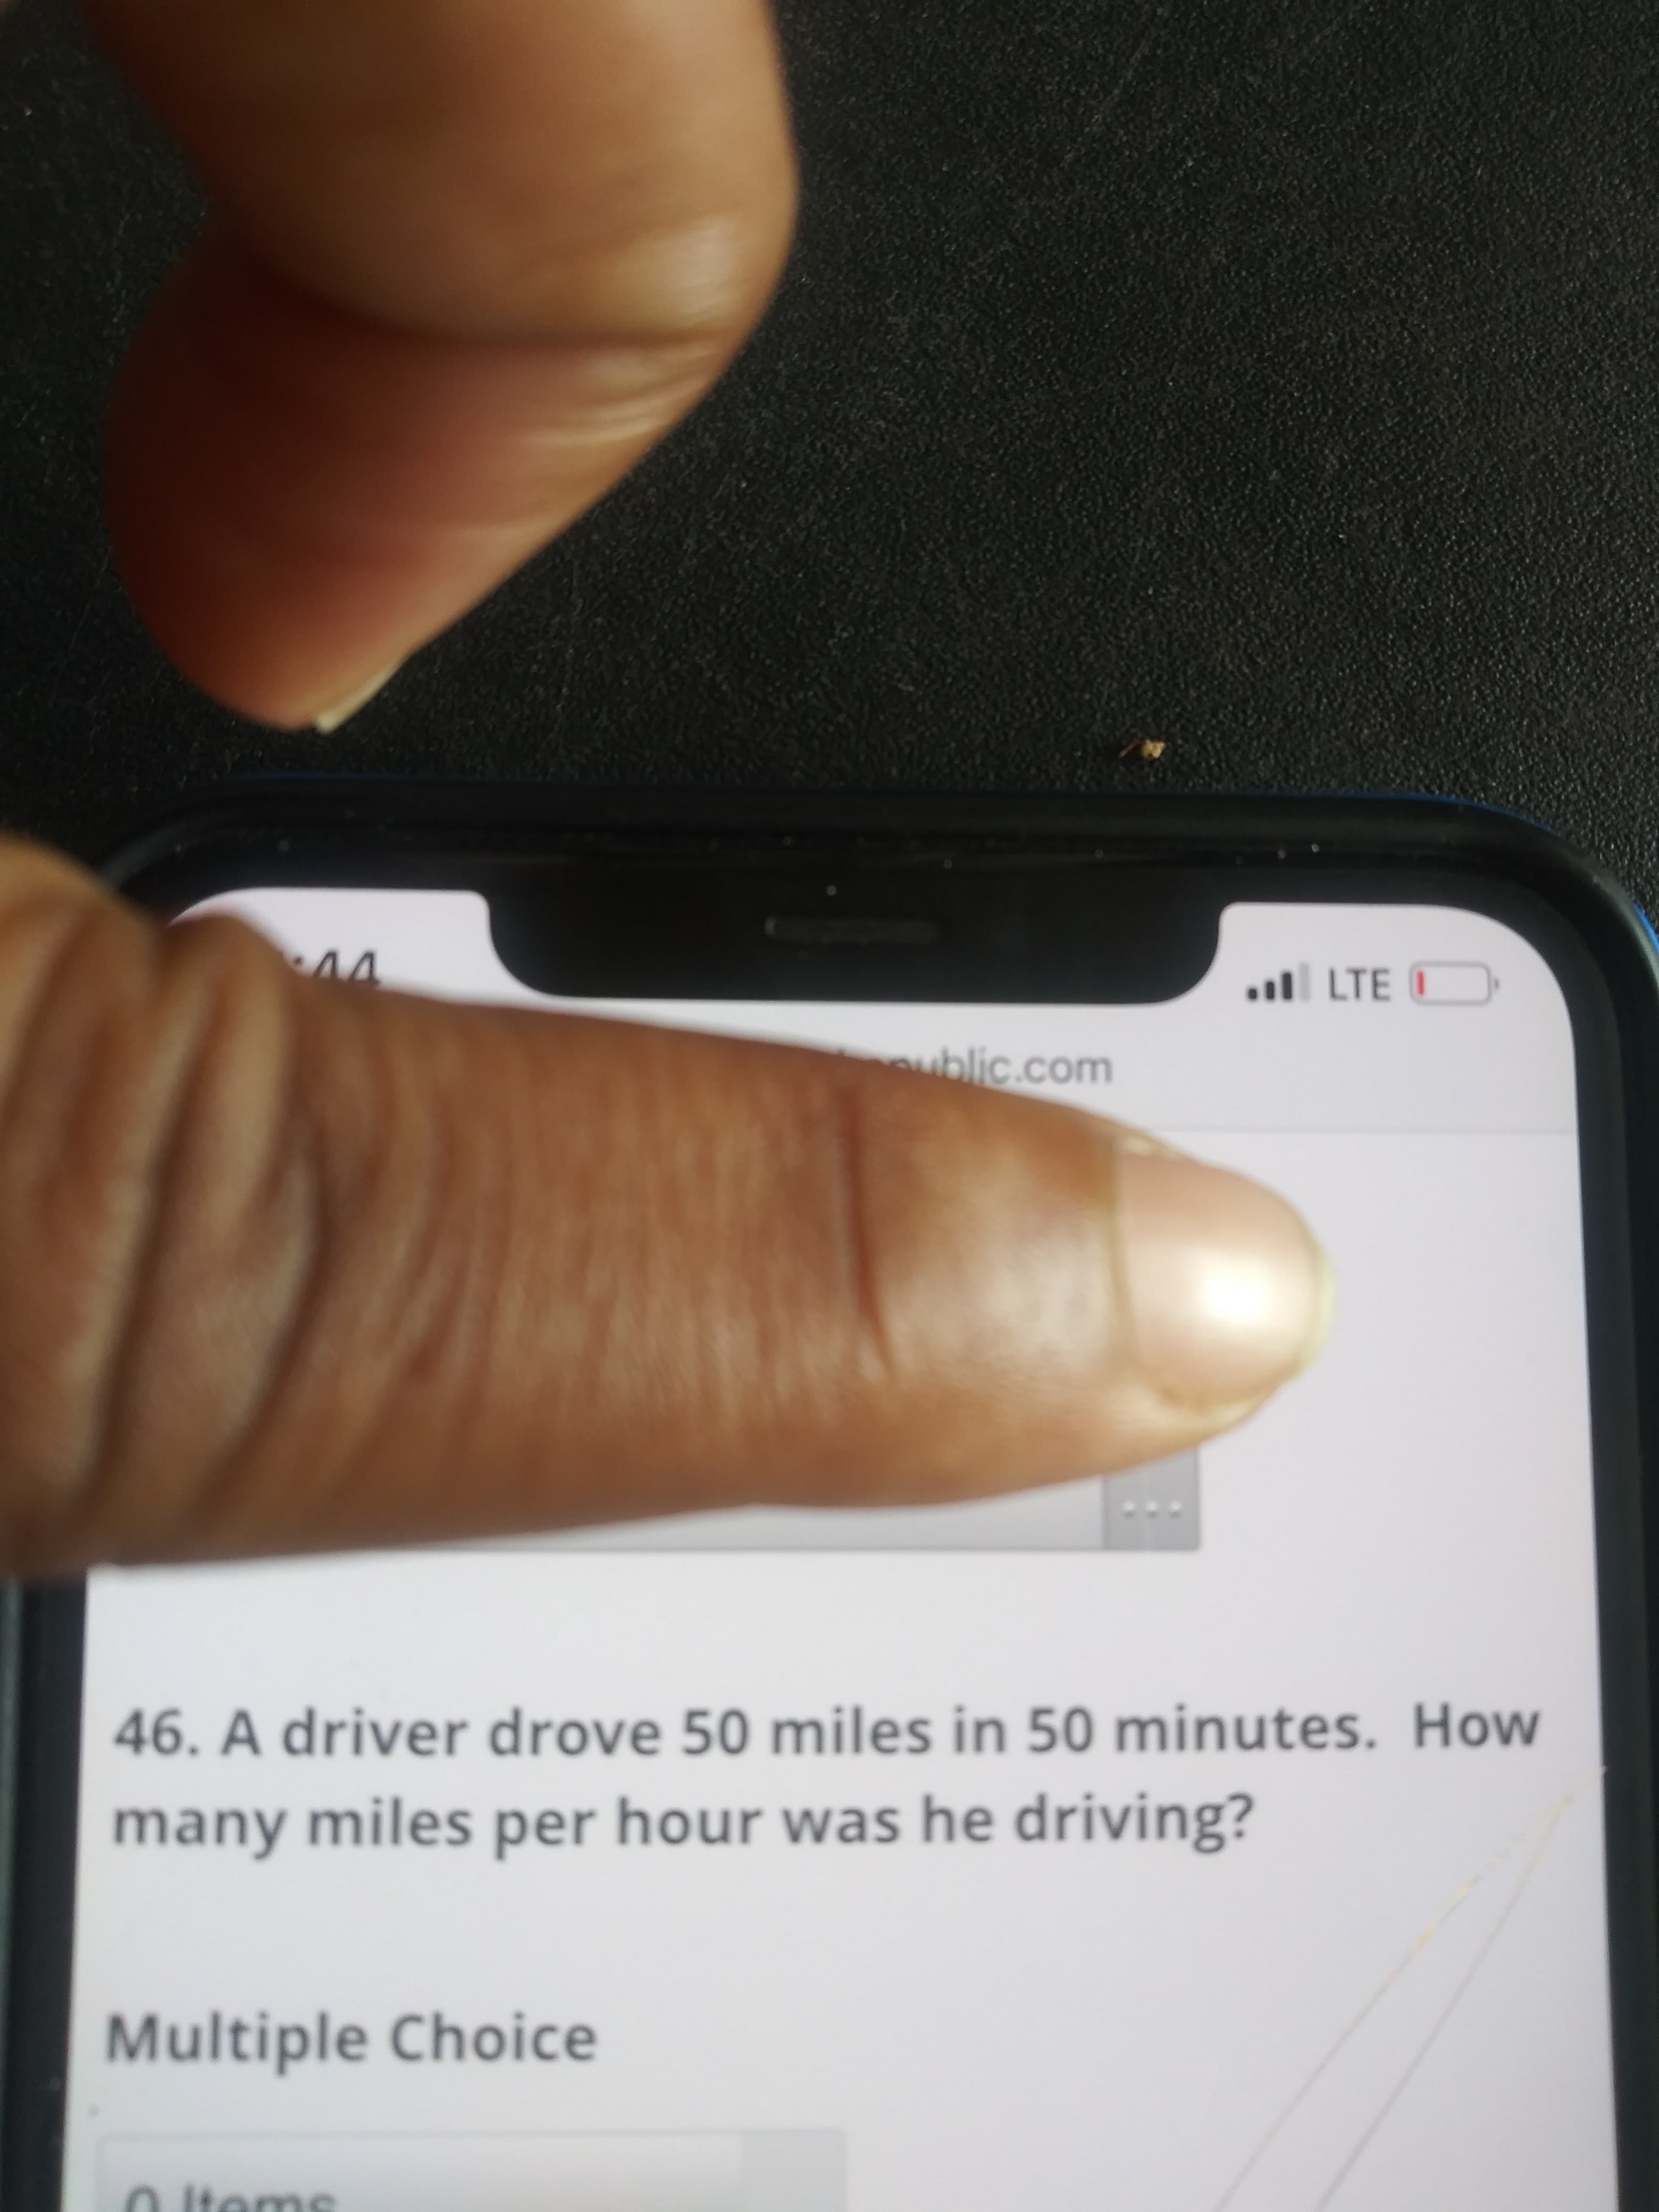 46. A driver drove 50 miles in 50 minutes. How
many miles per hour was he driving?
